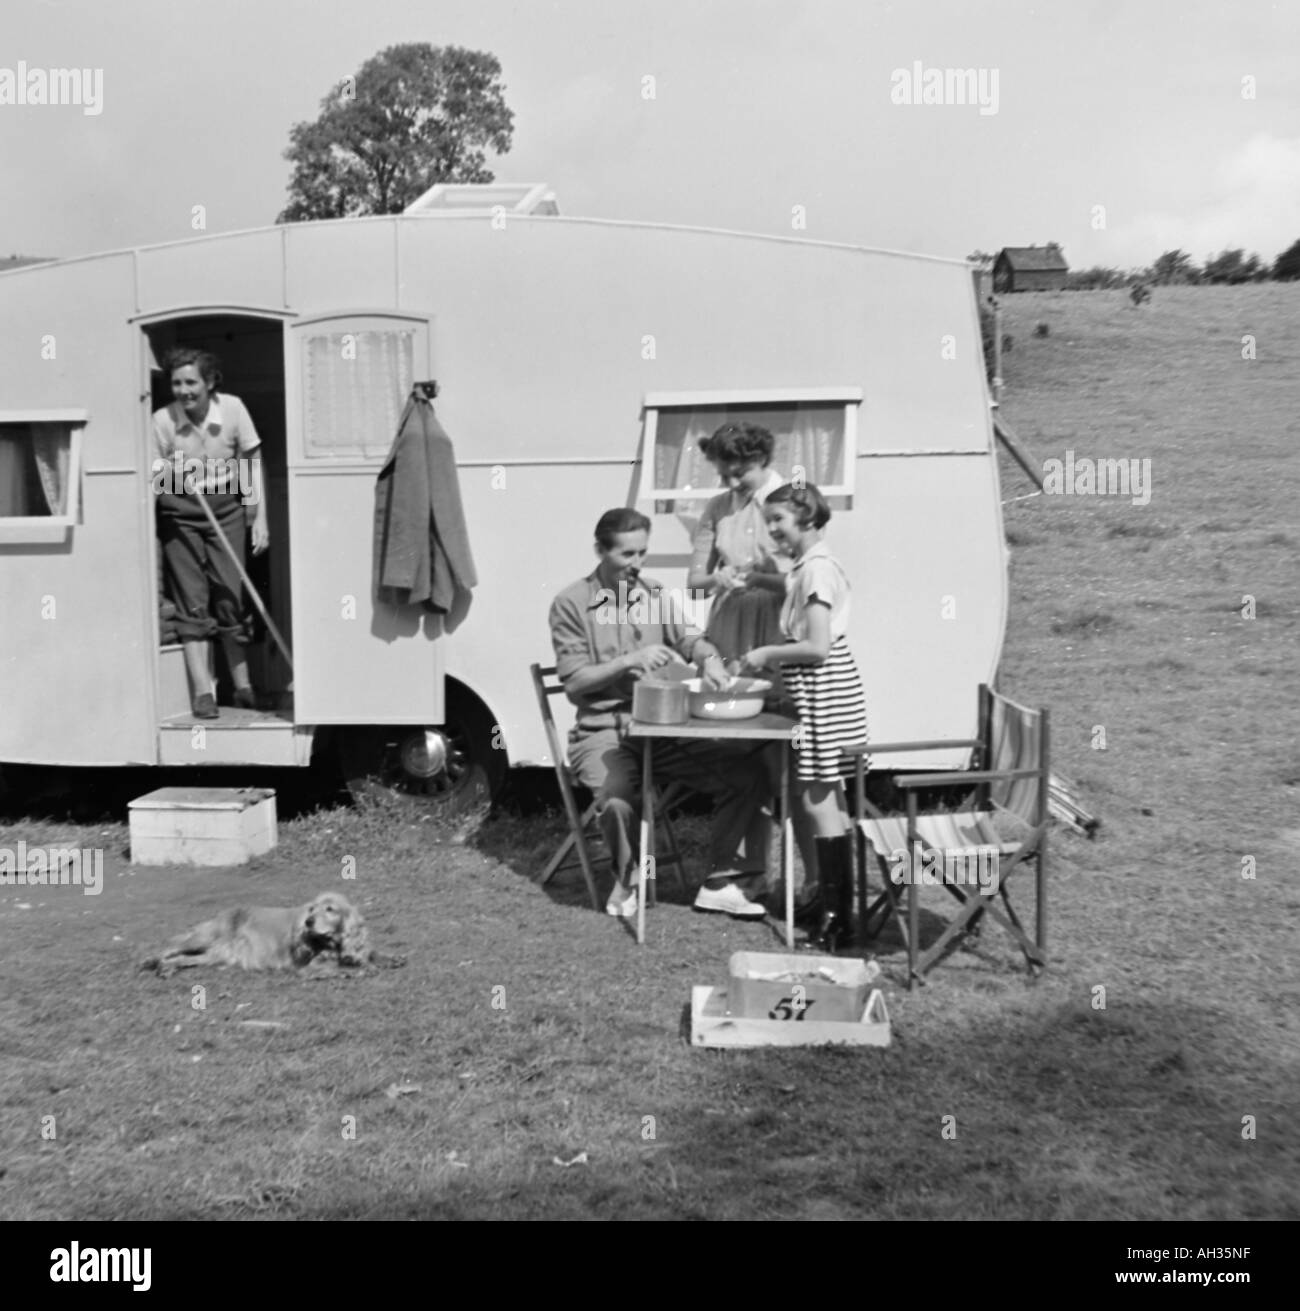 OLD VINTAGE FAMILY SNAPSHOT PHOTOGRAPH OF FAMILY ON CAMPING HOLIDAY WITH CARAVAN Stock Photo